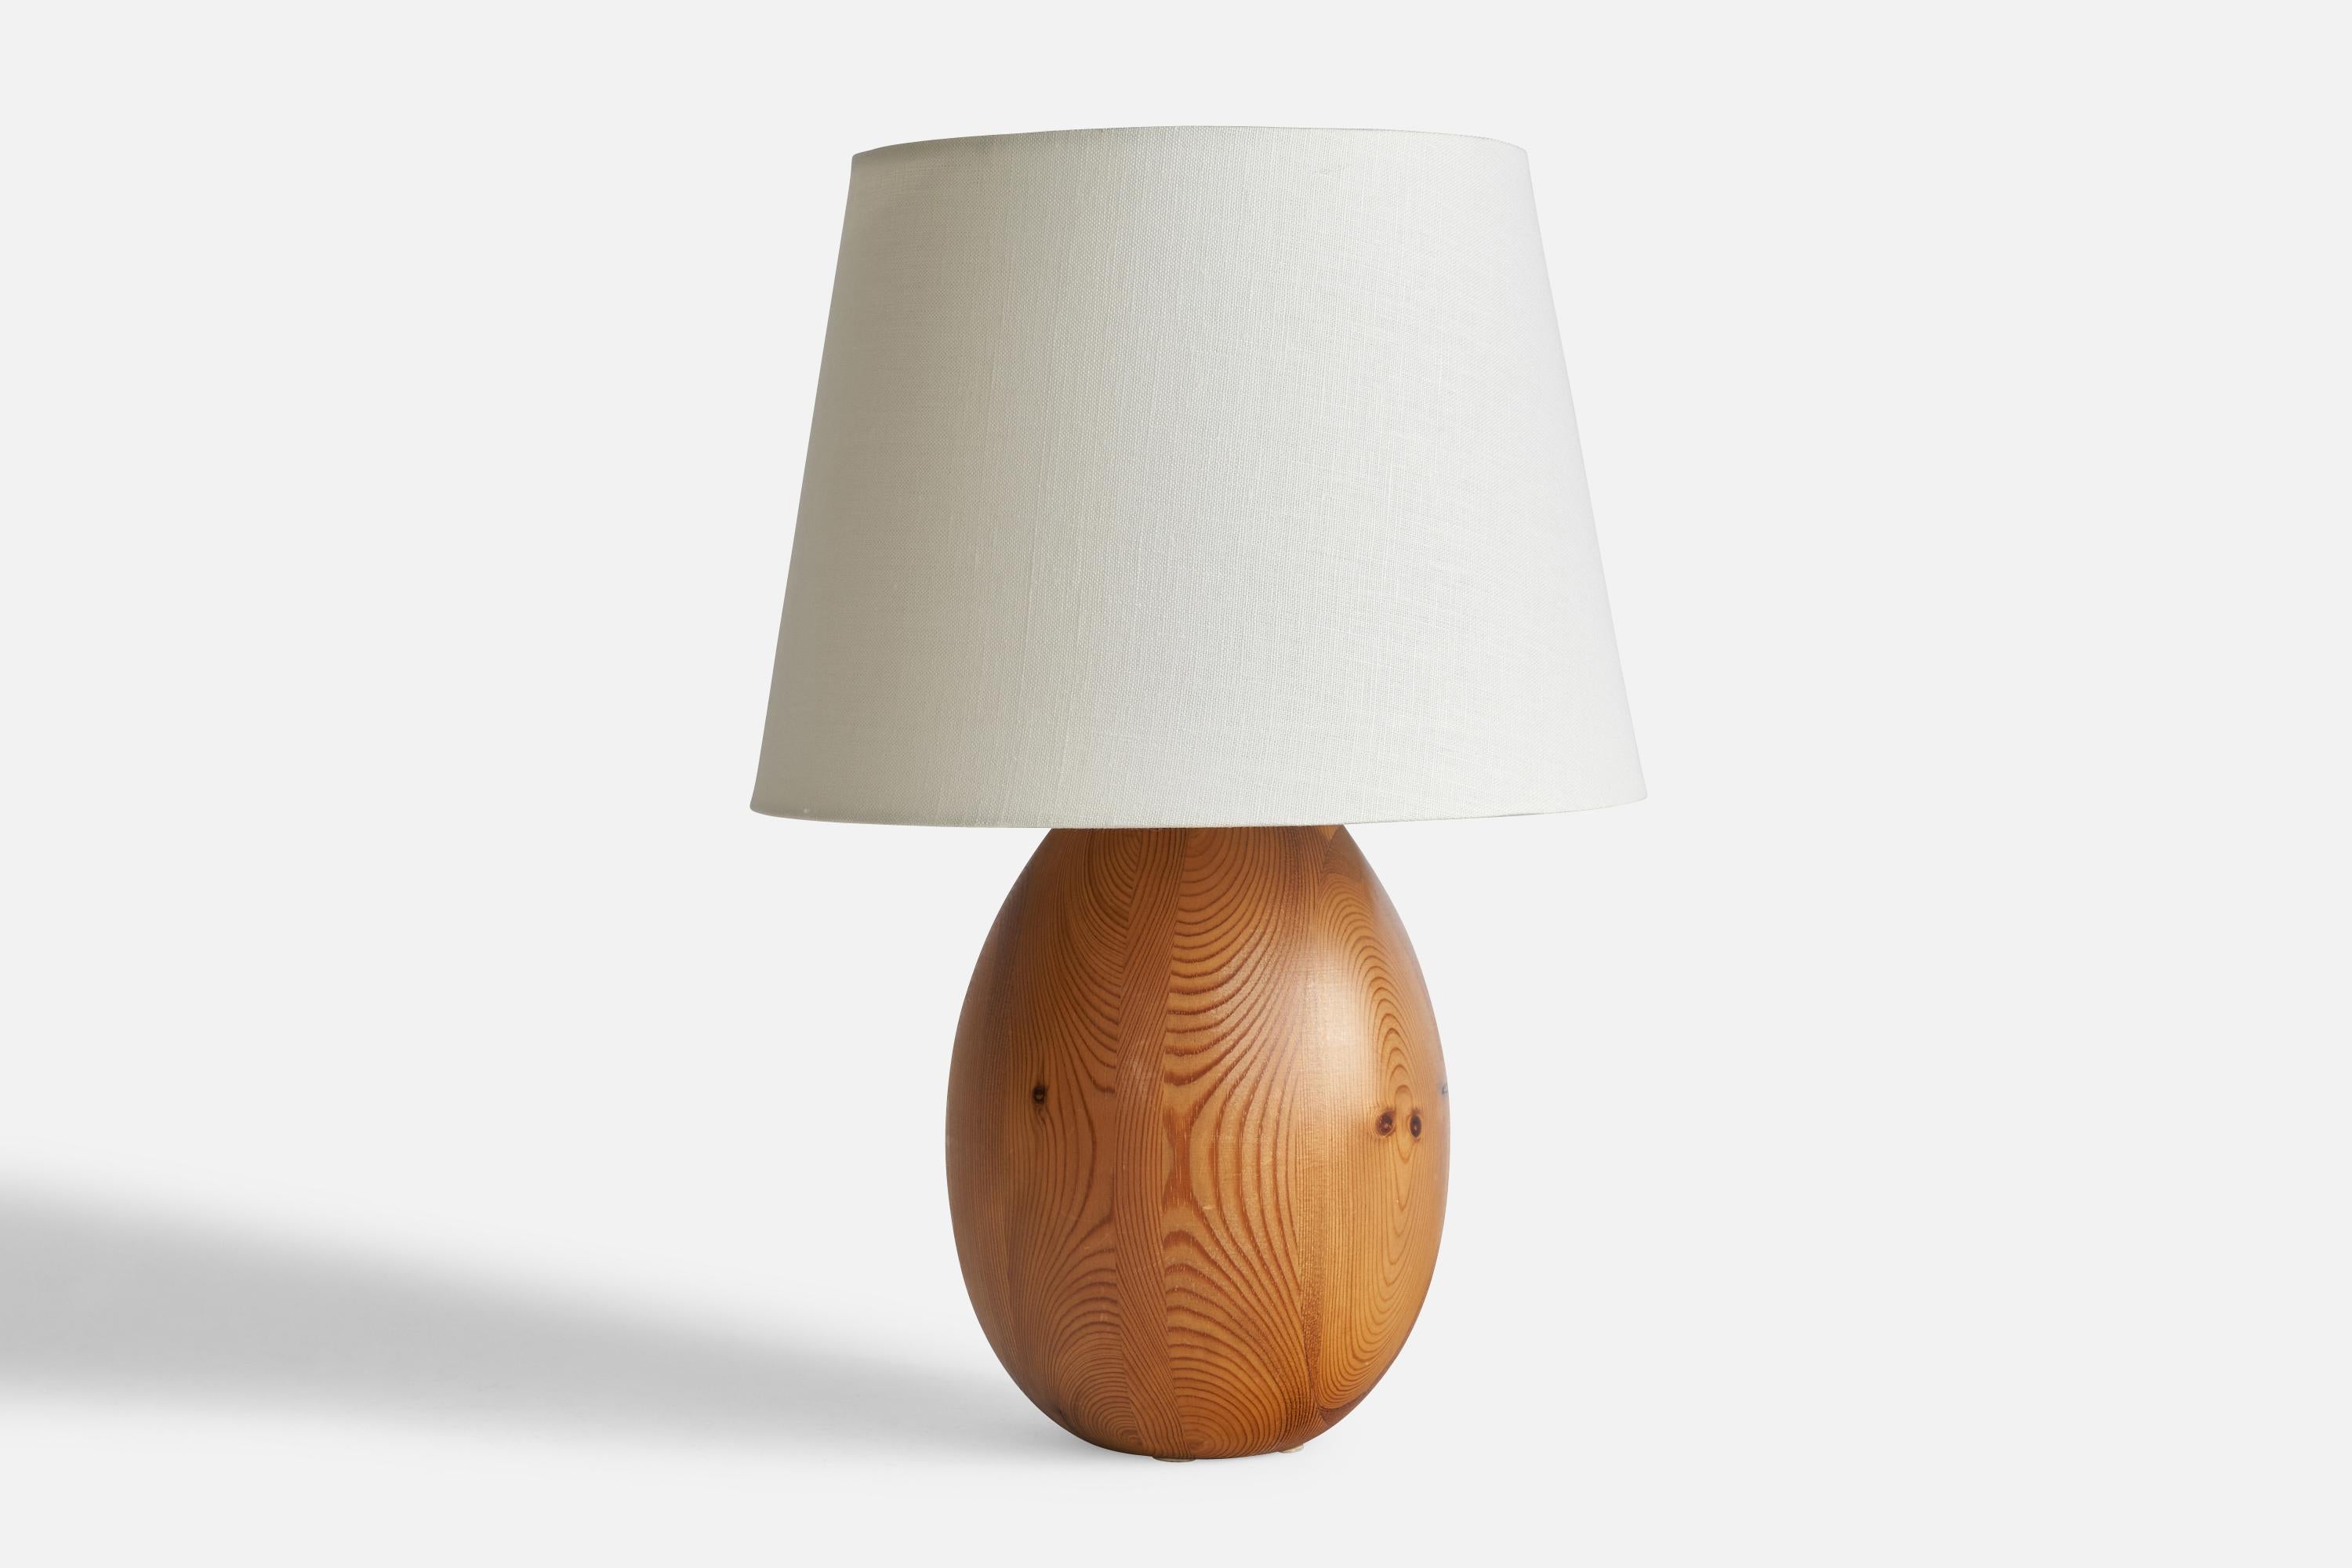 Late 20th Century Swedish Designer, Table Lamps, Pine, Sweden, 1970s For Sale